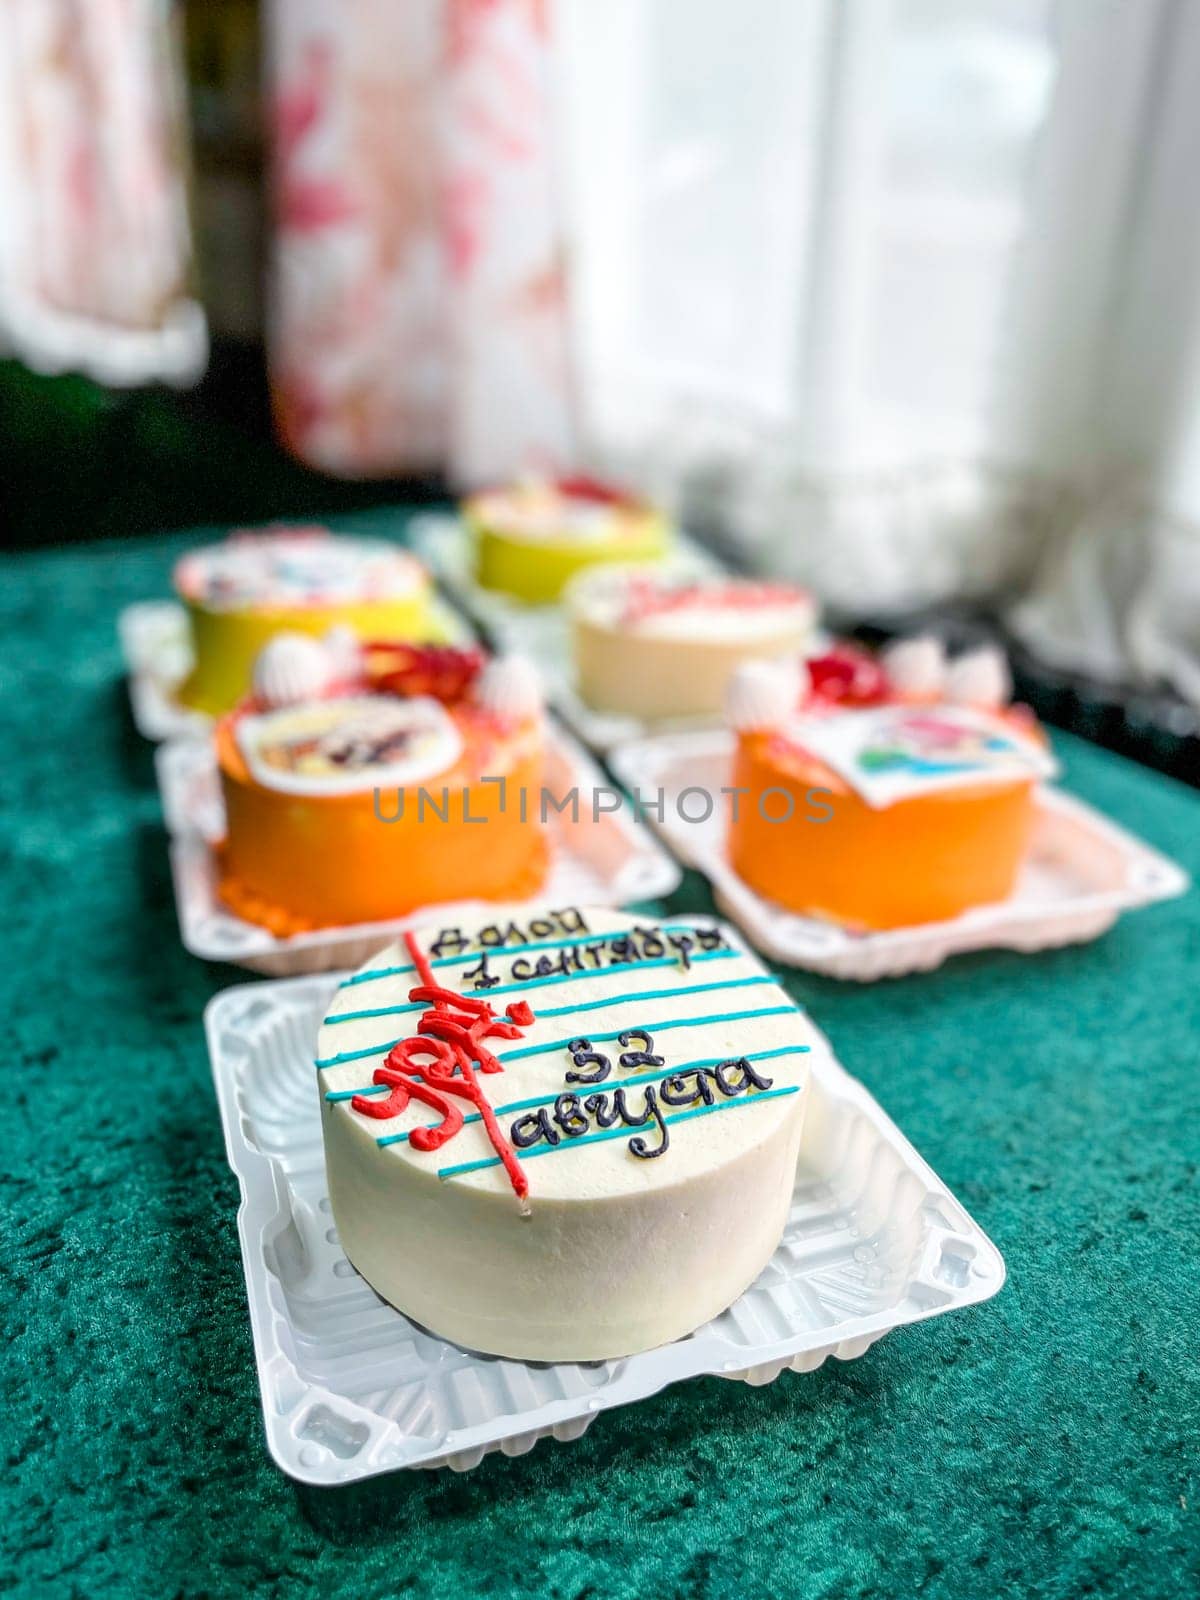 Round white cake with red and blue icing for 1 September Knowledge Day celebration by Pukhovskiy